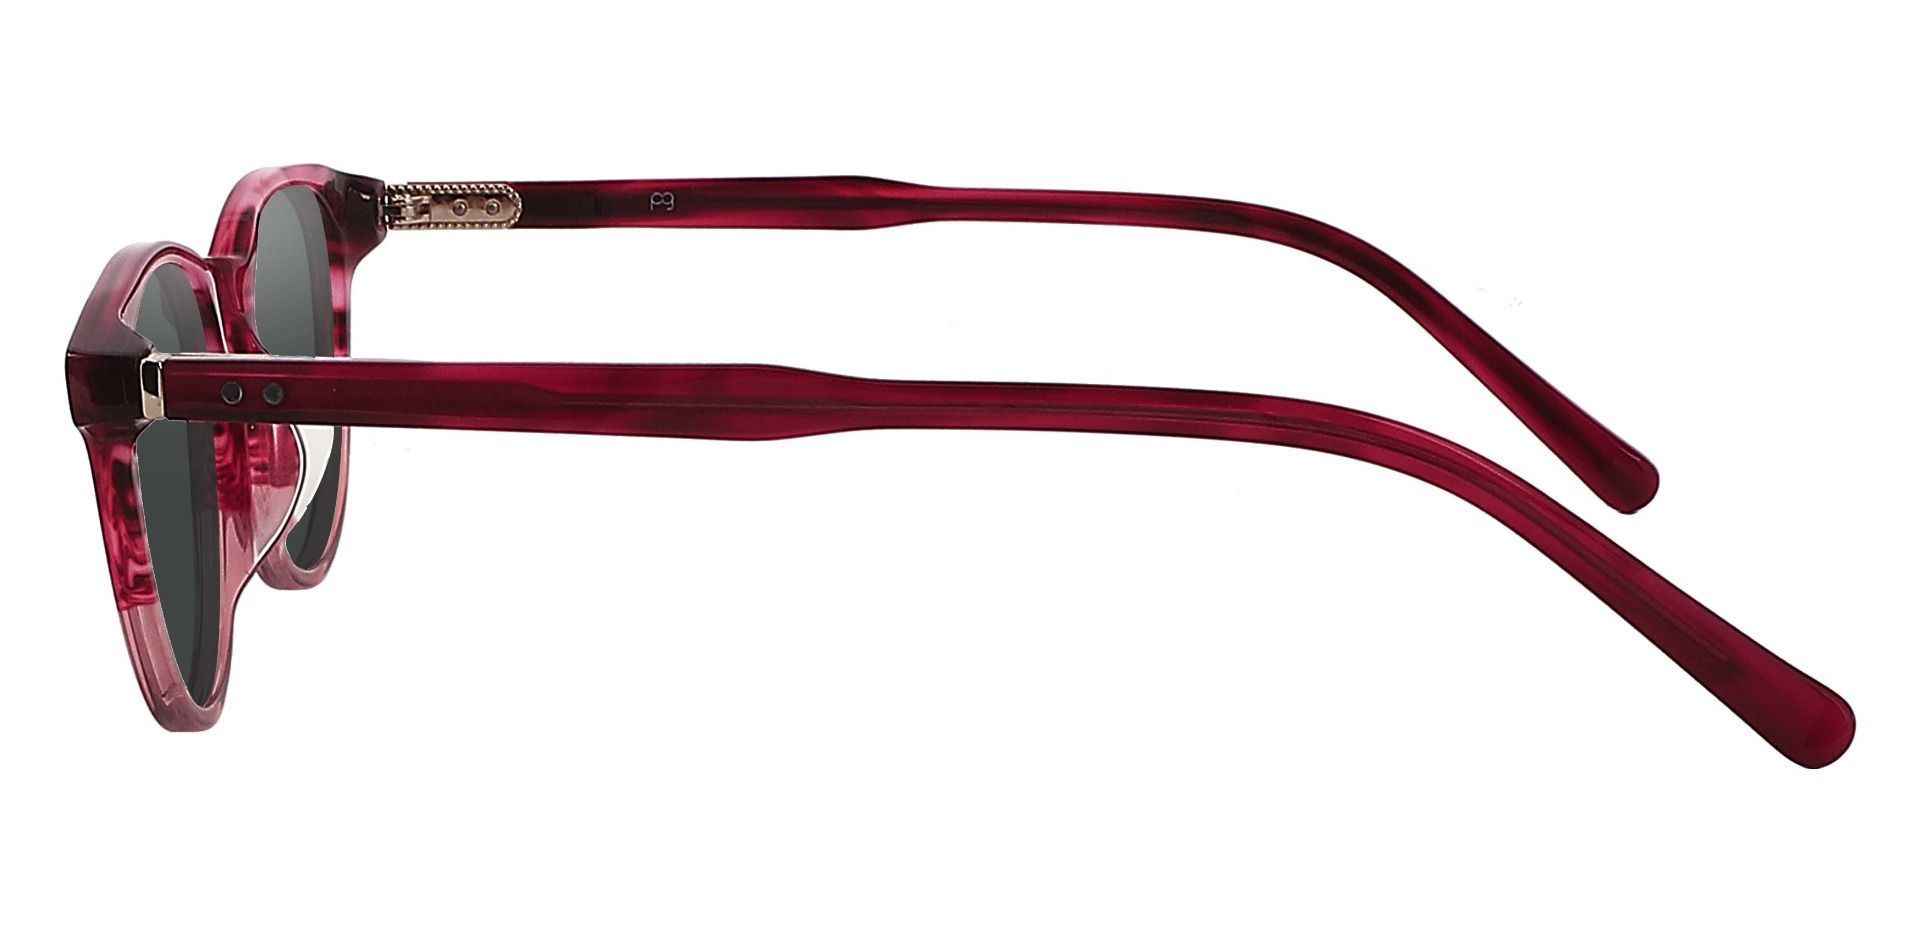 Marianna Oval Non-Rx Sunglasses - Red Frame With Gray Lenses